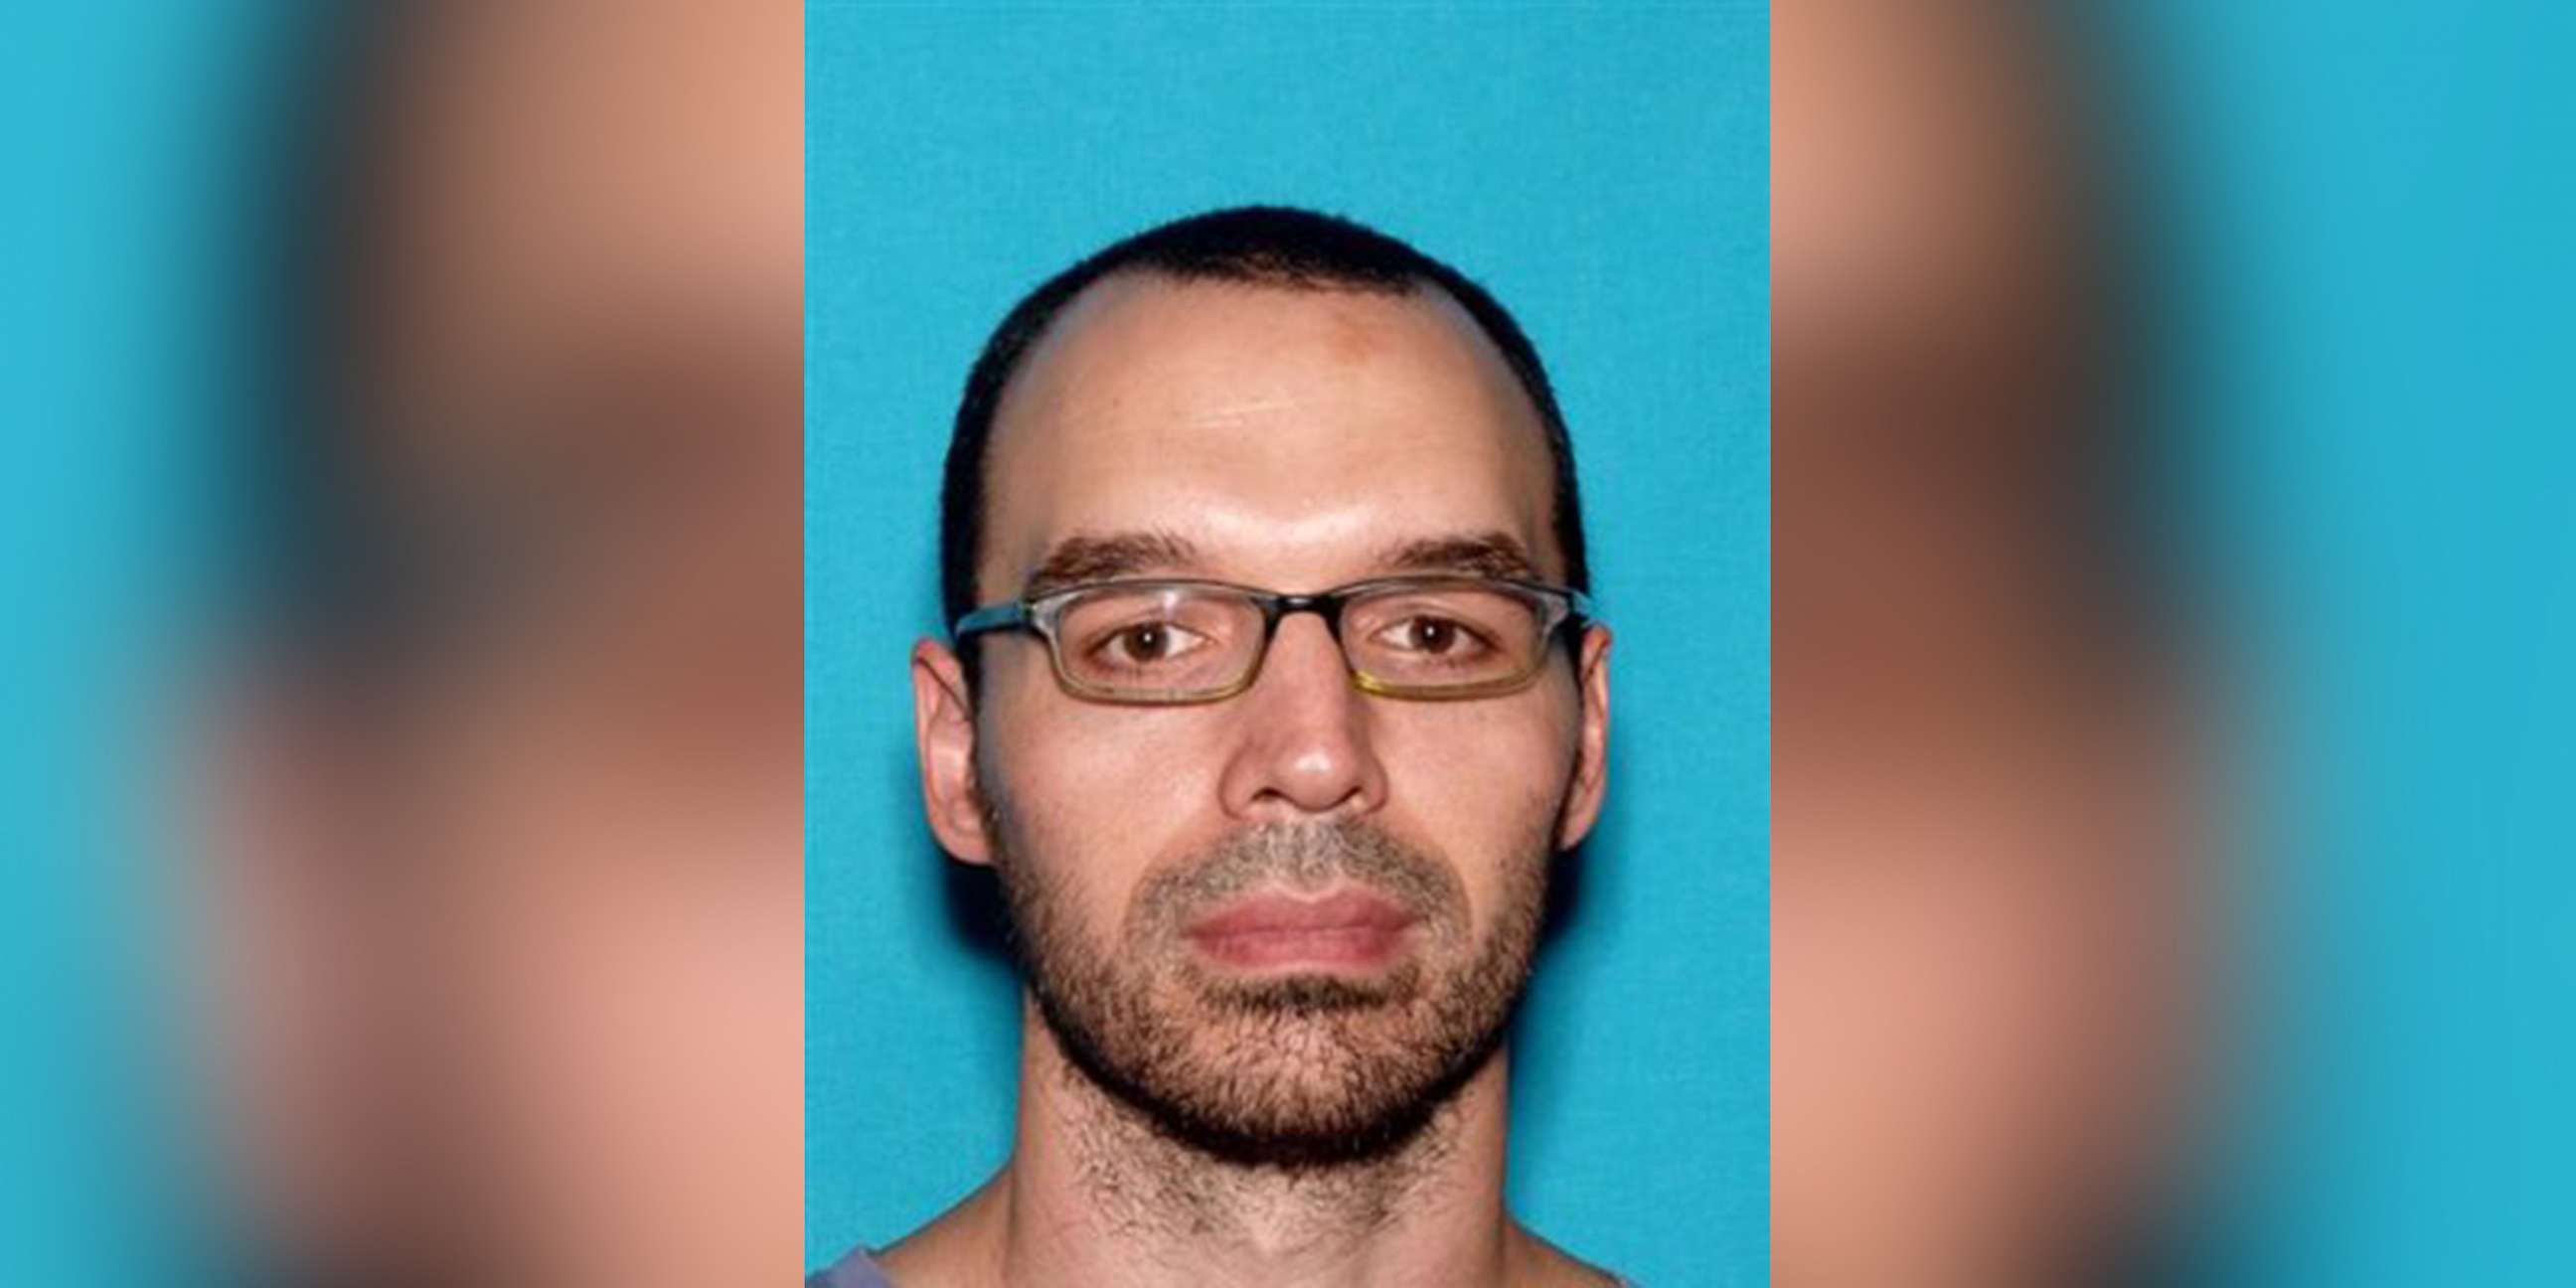 PHOTO: Metro Nashville police released this image of Domenic Micheli on June 4, 2018, saying he was being sought in relation to a fatal attack at a fitness center in Nashville, Tenn.